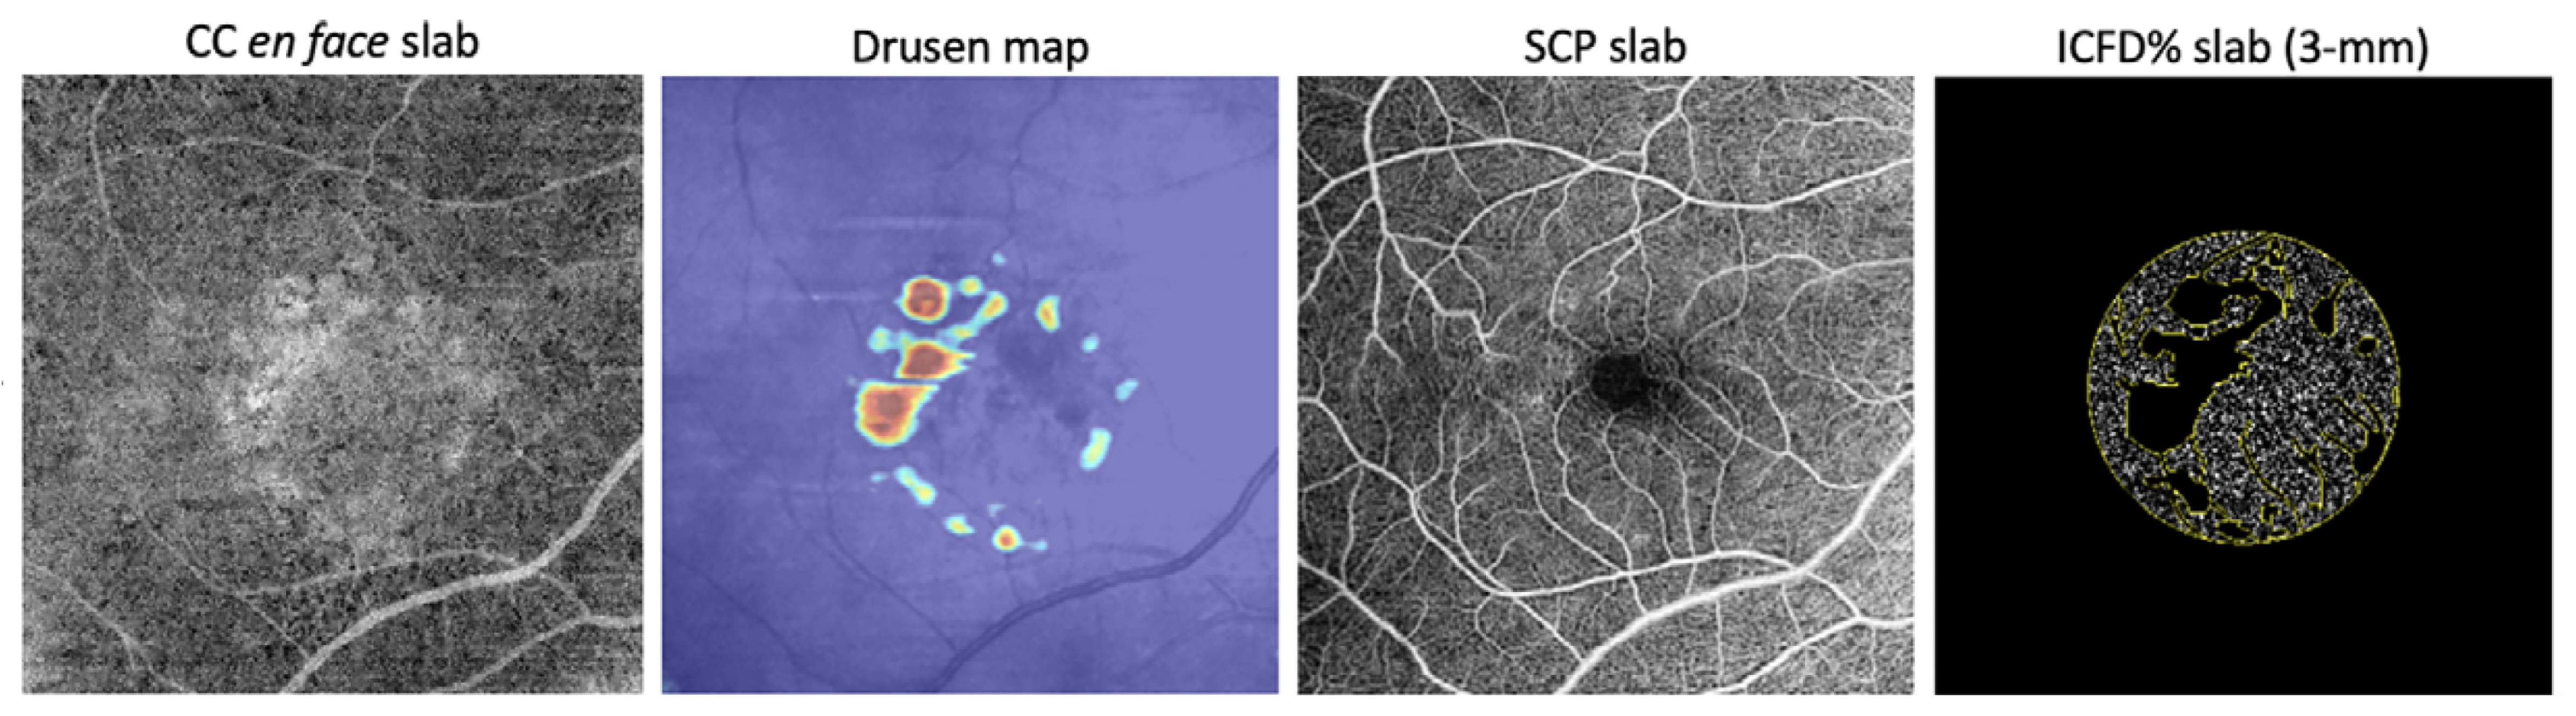 The researchers began with conventional OCT-A imaging of the choriocapillaris, then isolated drusen and the superficial capillary plexus to highlight the structures that might exert a shadowing effect. The IC-FD% was then measured in the central 3mm and 6mm regions. Finally, the team correlated IC-FD% with AMD stage.